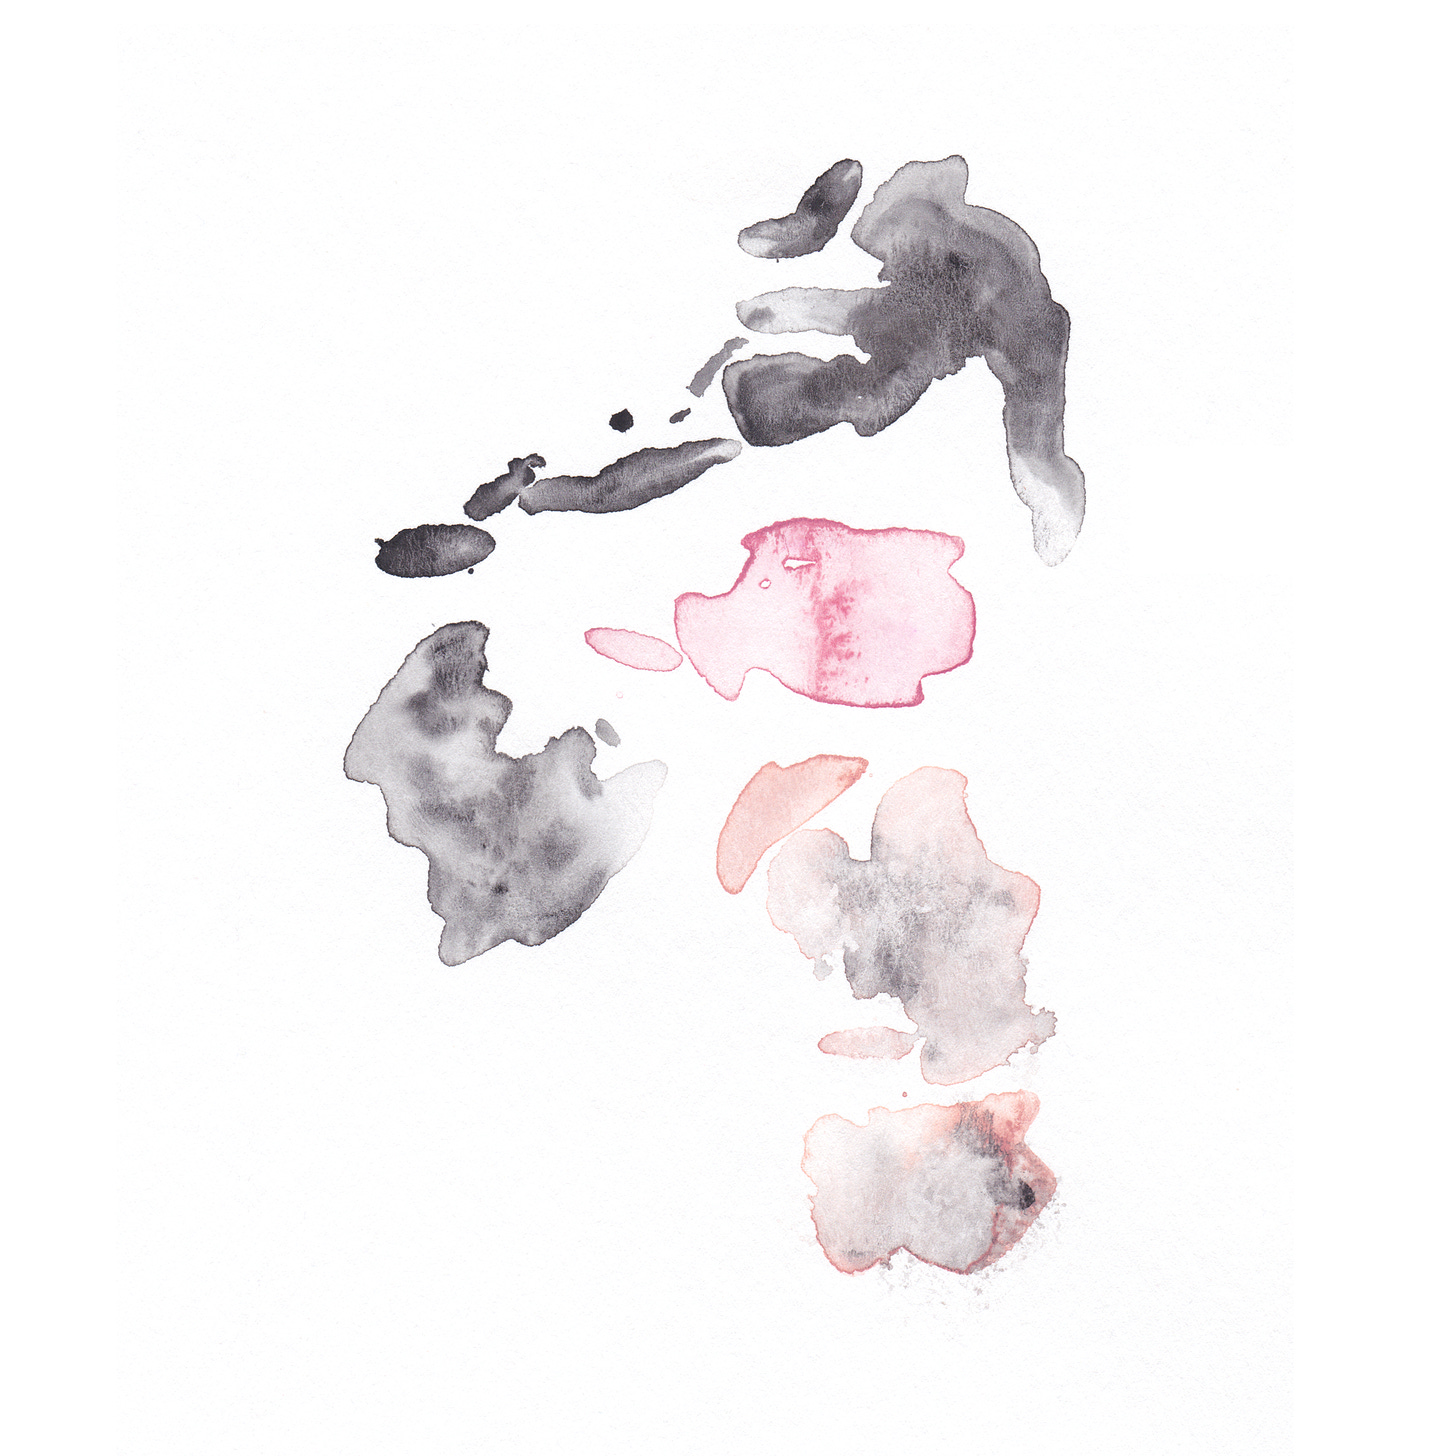 Abstract image of soft watercolor in black, gray, rose pink, and salmon pink